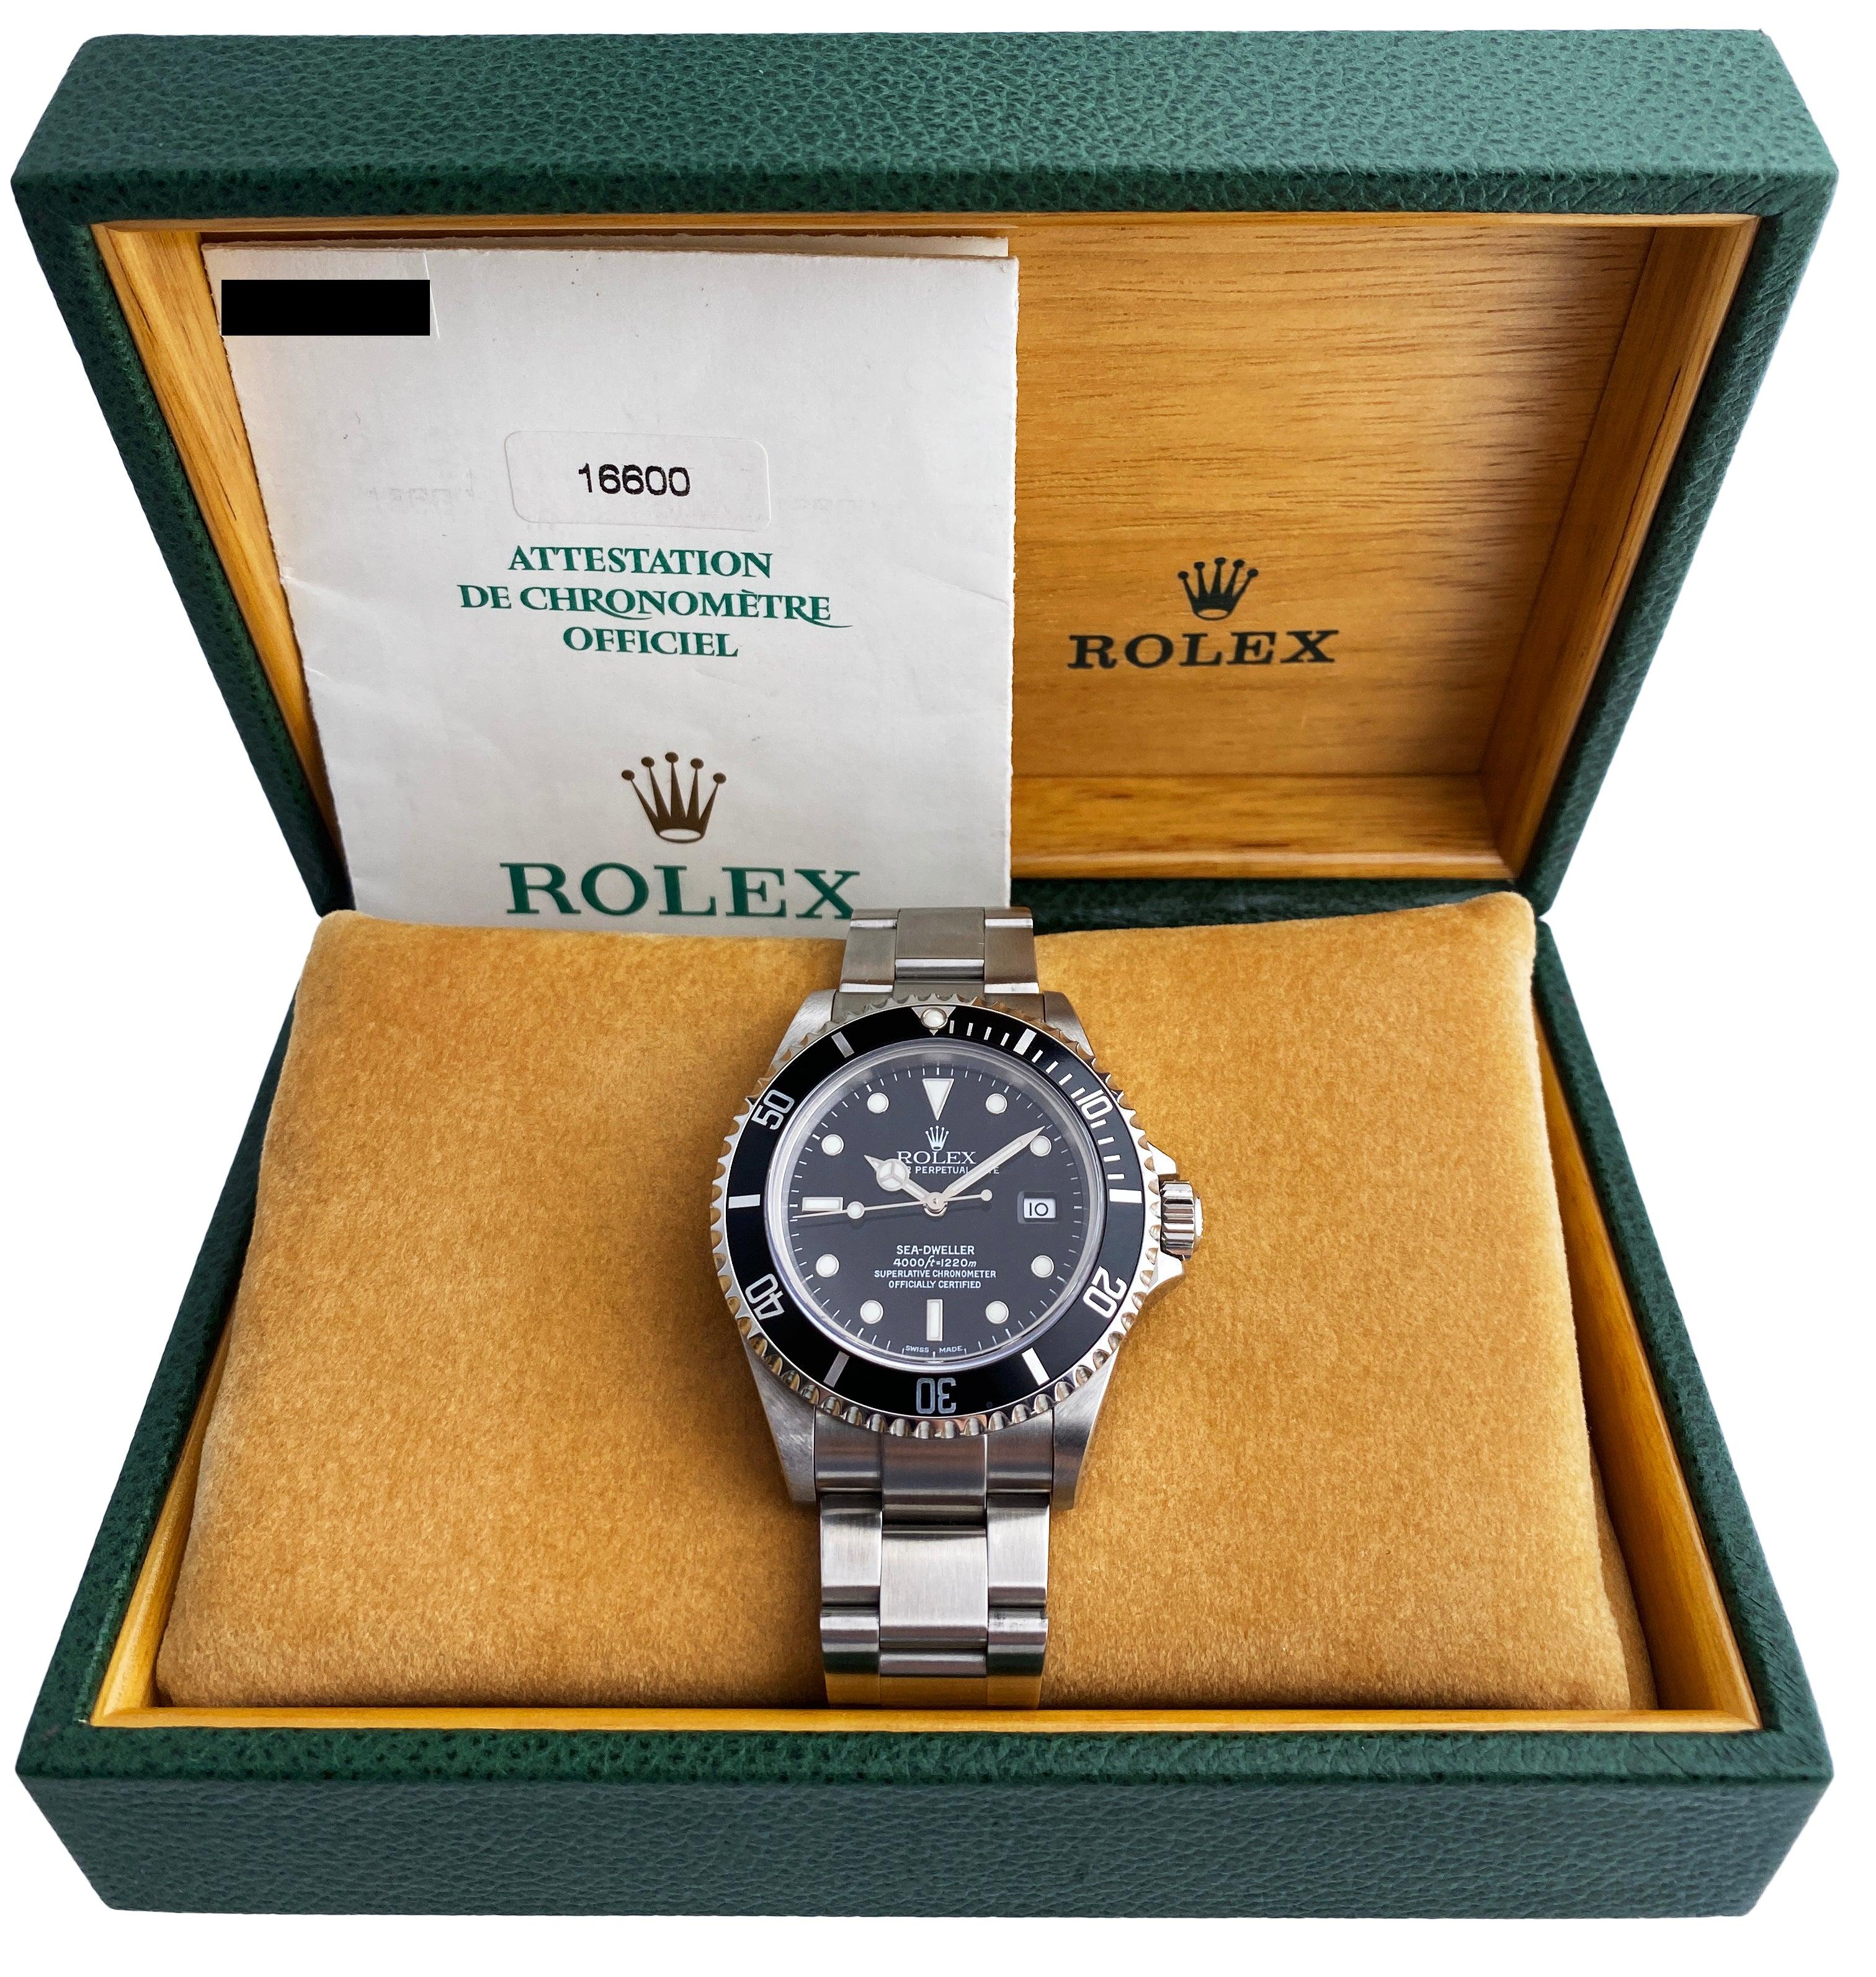 Rolex Oyster Perpetual Date Sea-Dweller 16600 Mens Watch. 40mm stainless steel case. Unidirectional rotating stainless steel bezel with black insert. Black dial with luminous Mercedes steel hands and index hour marker. Date display by the 3 o'clock